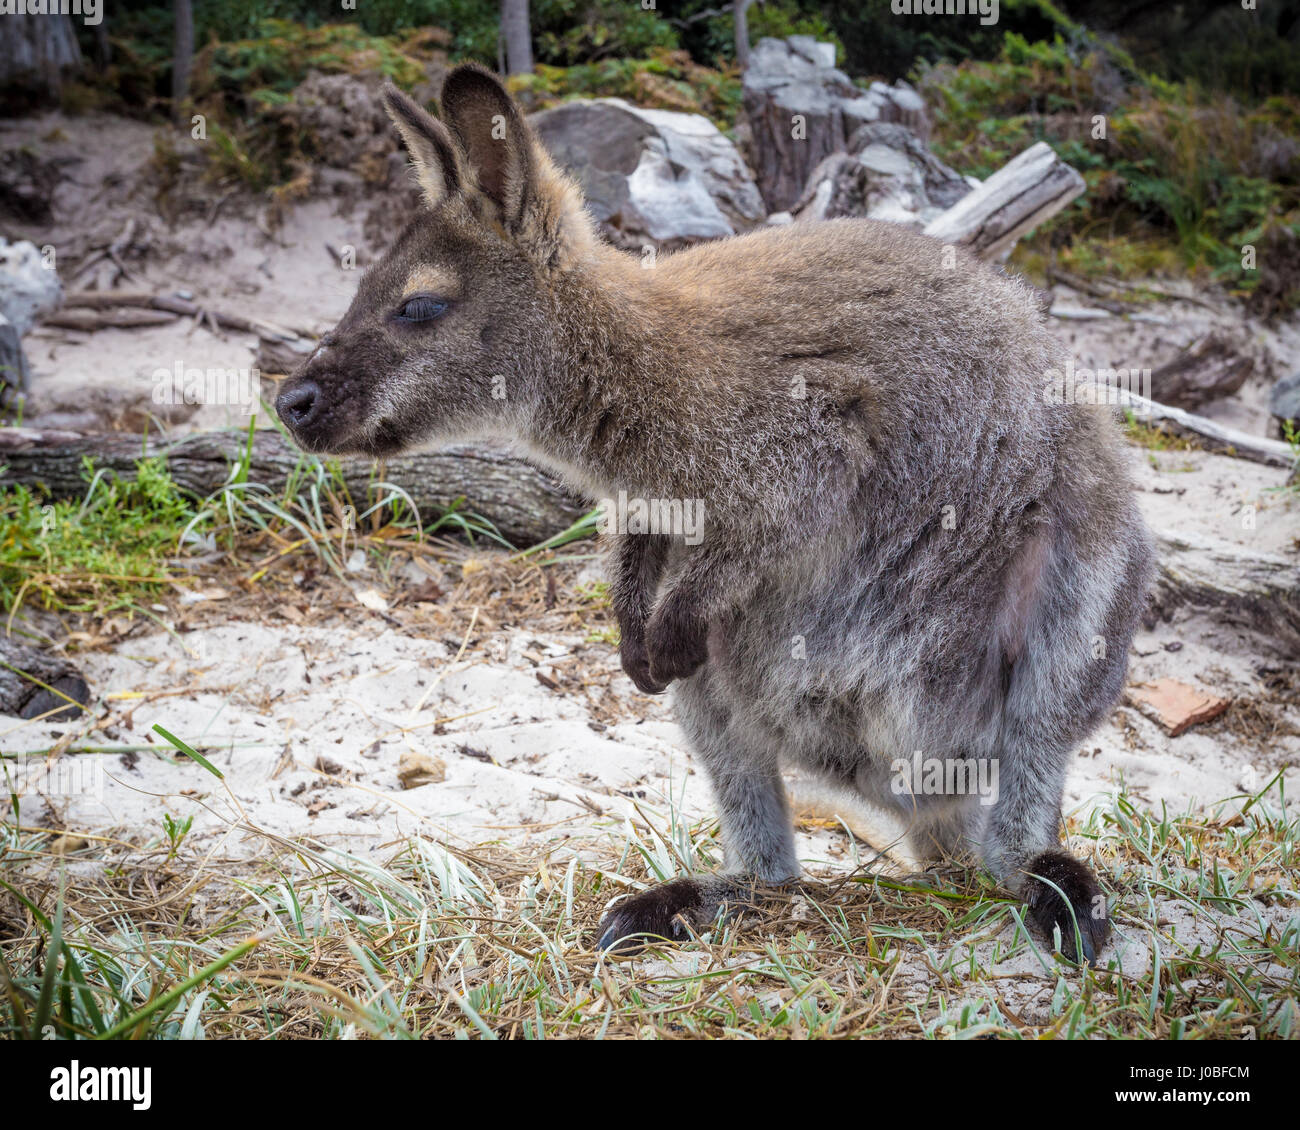 The red-necked wallaby or Bennett's wallaby (Macropus rufogriseus) sitting on a beach Stock Photo